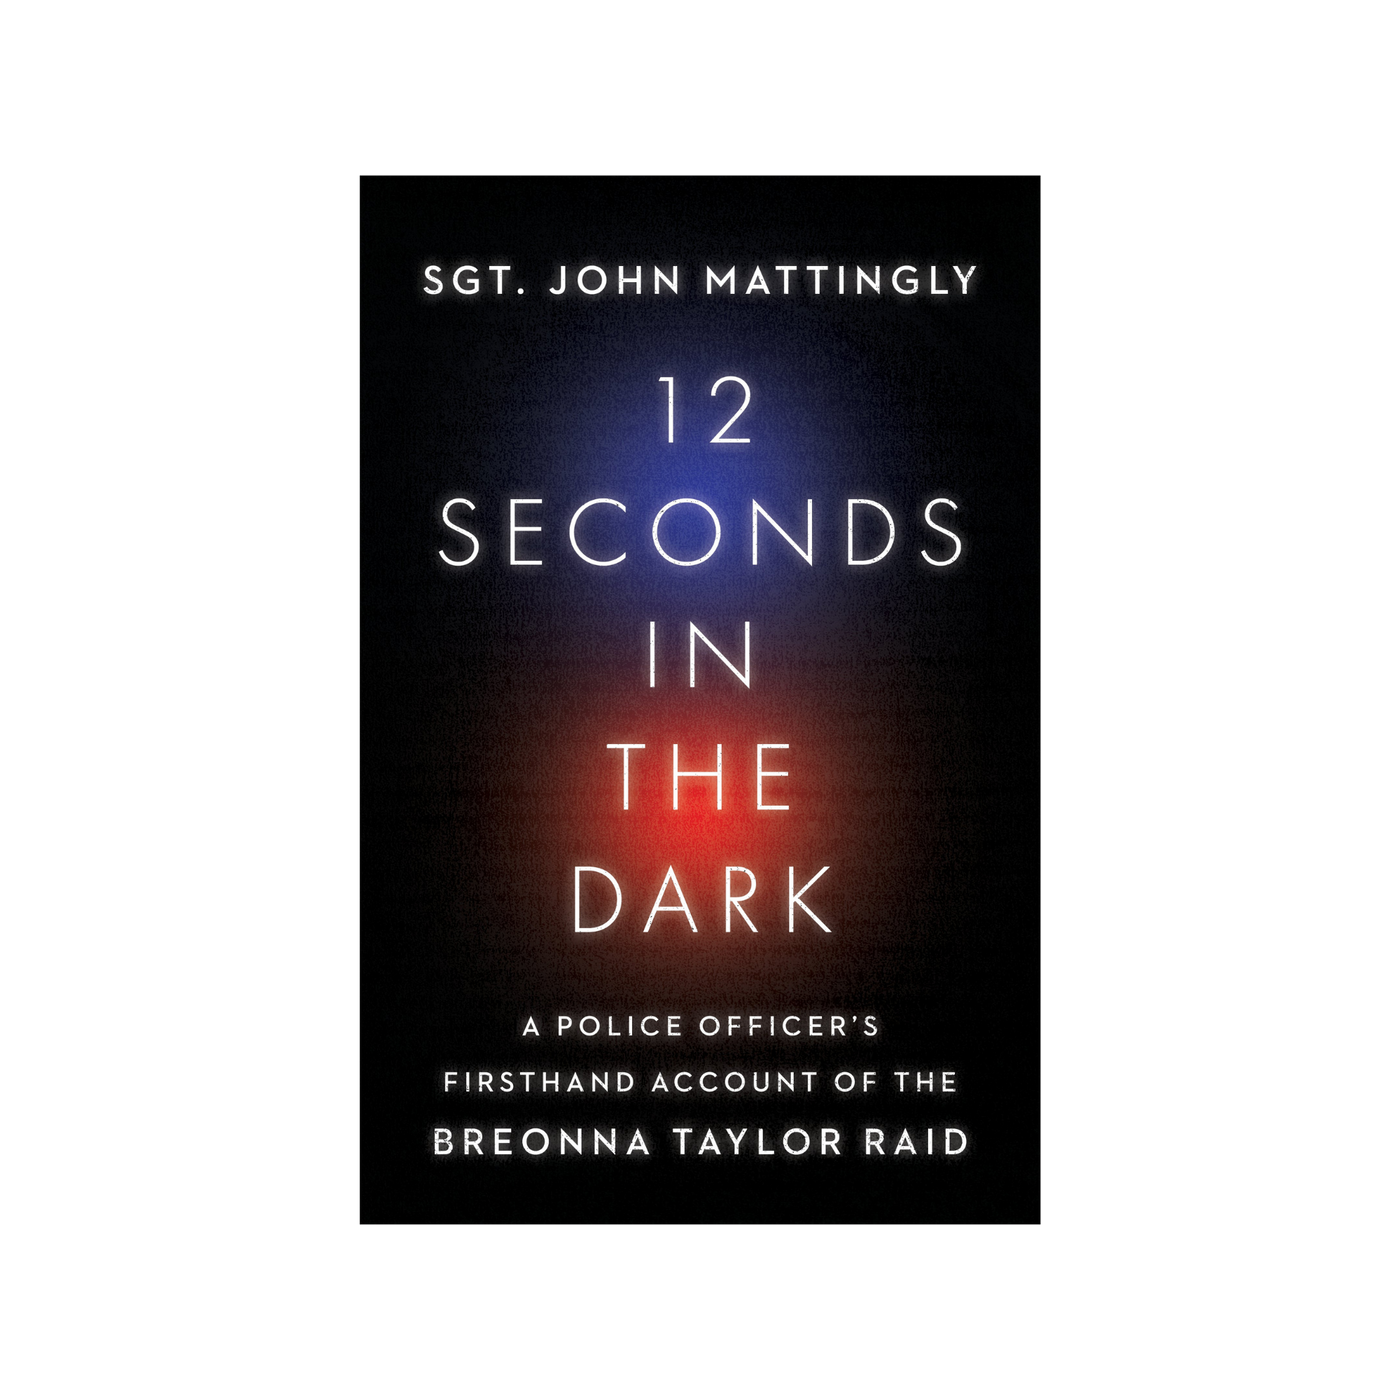 12 Seconds in the Dark by Sgt. John Mattingly